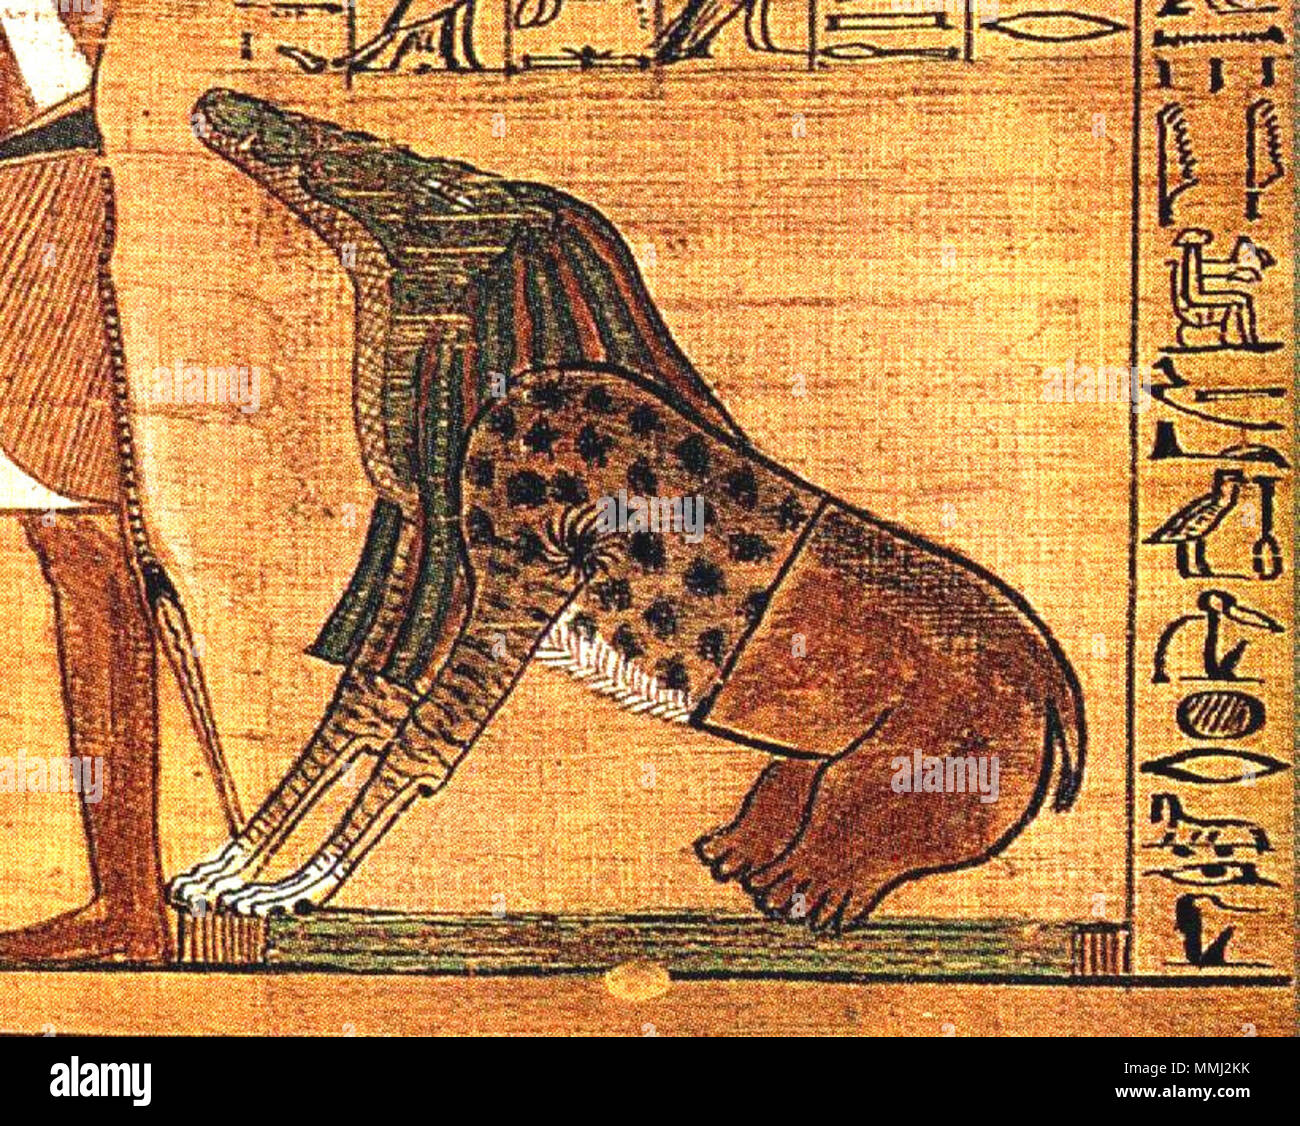 .  English: The Weighing of the Heart from the Book of the Dead of Ani. At left, Ani and his wife Tutu enter the assemblage of gods. At center, Anubis weighs Ani's heart against the feather of Maat, observed by the goddesses Renenutet and Meshkenet, the god Shay, and Ani's own ba. At right, the monster Ammut, who will devour Ani's soul if he is unworthy, awaits the verdict, while the god Thoth prepares to record it. At top are gods acting as judges: Hu and Sia, Hathor, Horus, Isis and Nephthys, Nut, Geb, Tefnut, Shu, Atum, and Ra-Horakhty.  . 13 May 2011, 11:05 (UTC).  BD Weighing of the Heart Stock Photo